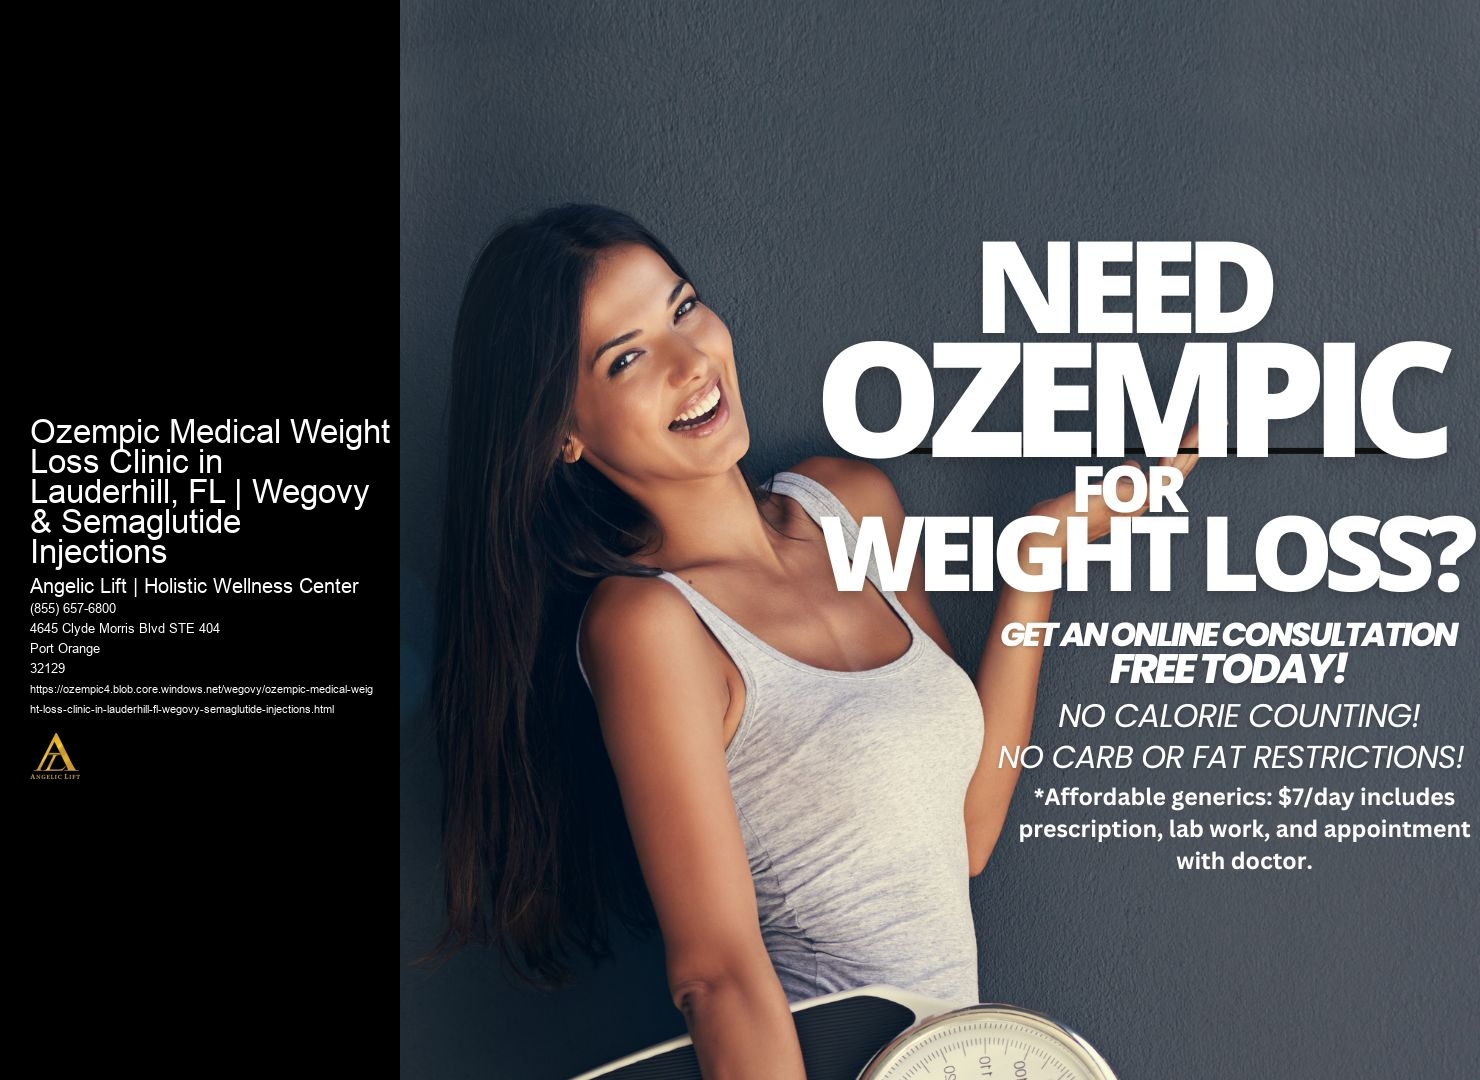 Ozempic Medical Weight Loss Clinic in Lauderhill, FL | Wegovy & Semaglutide Injections